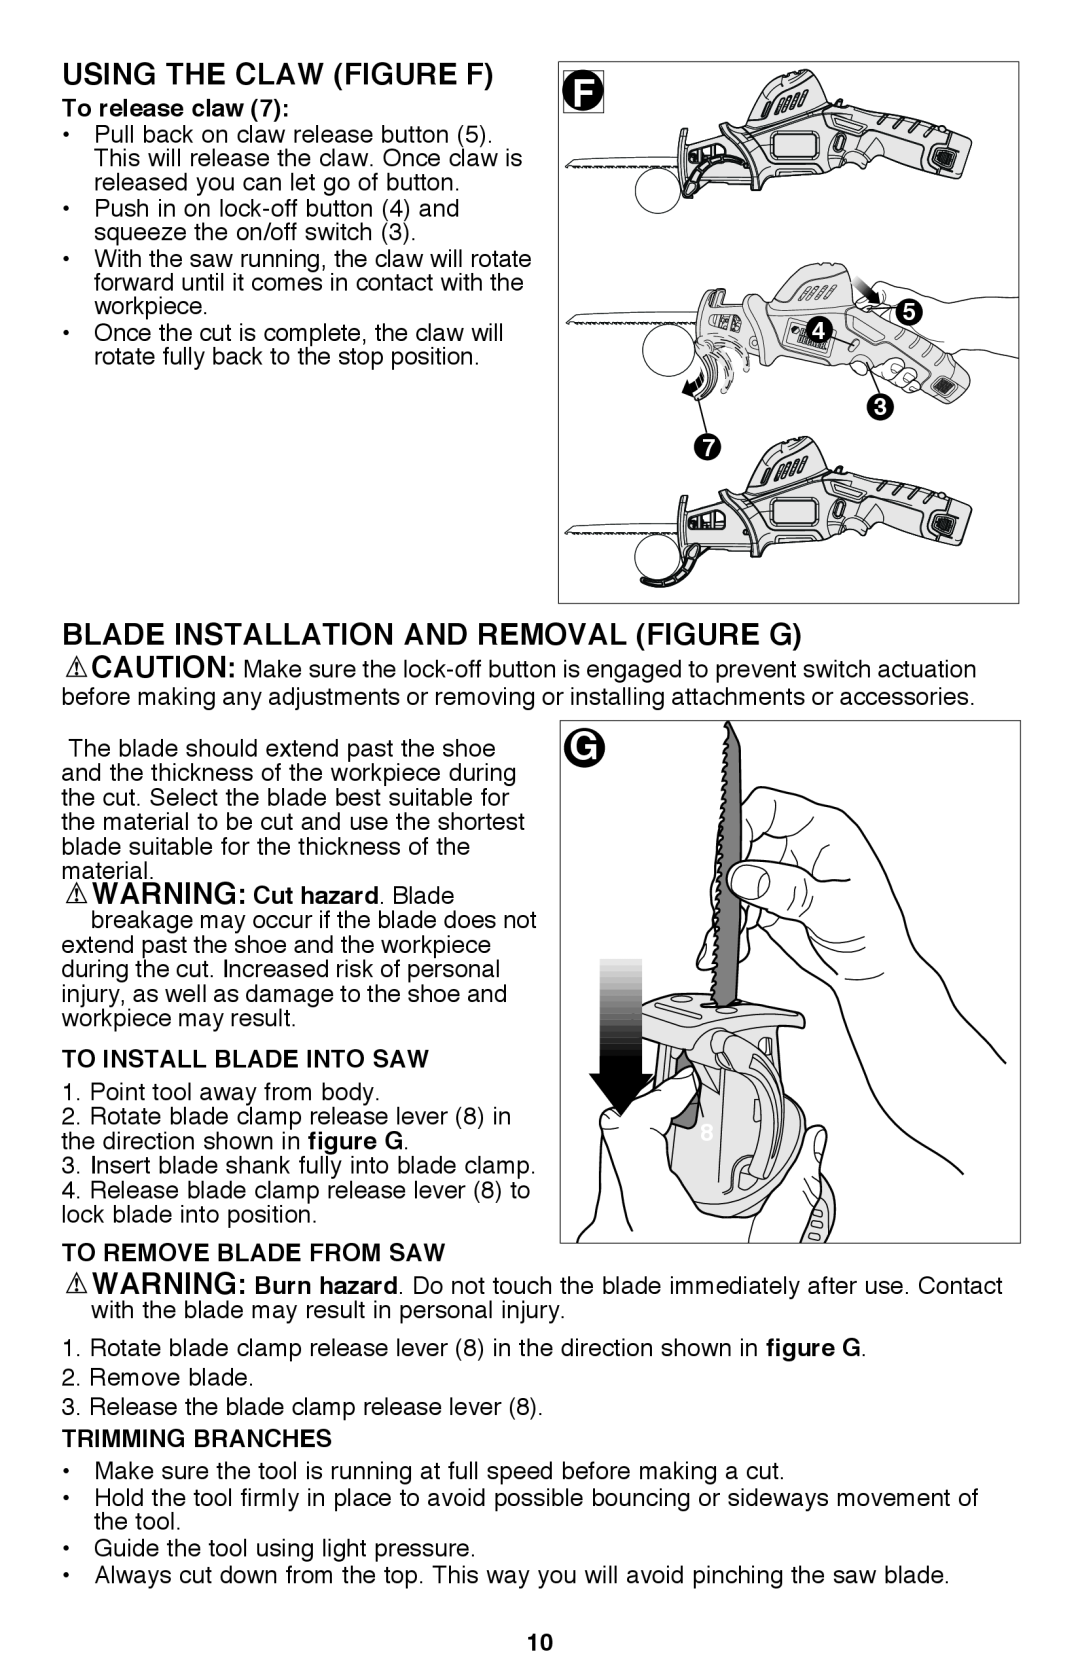 Black & Decker PSL12 instruction manual Using the Claw FigURE F, Blade Installation and Removal FigURE G 